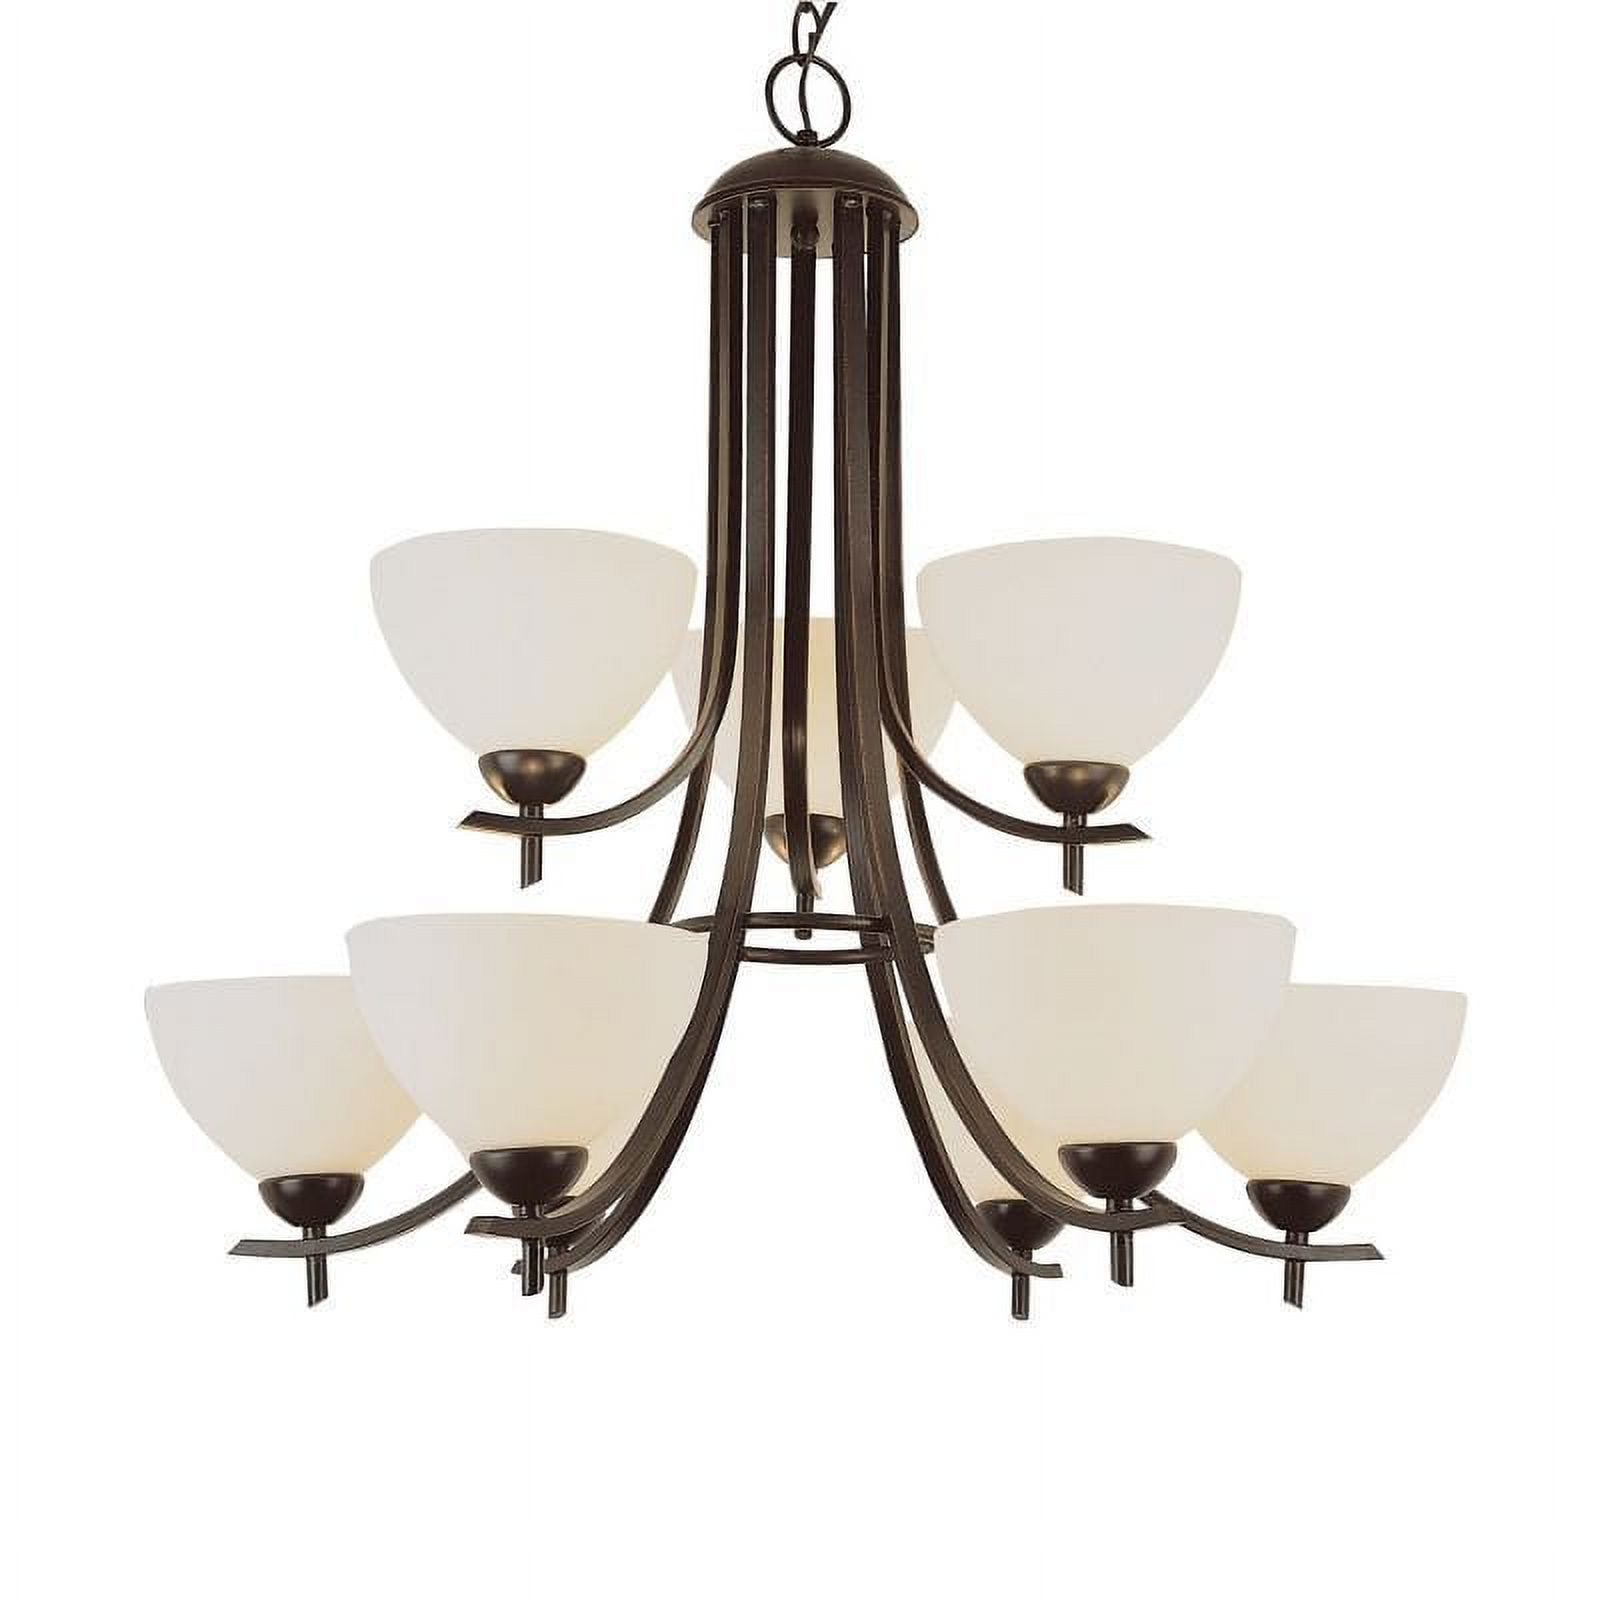 Trans Globe 8179 ROB Chandelier - Rubbed Oil Bronze - 30W in. - image 2 of 2